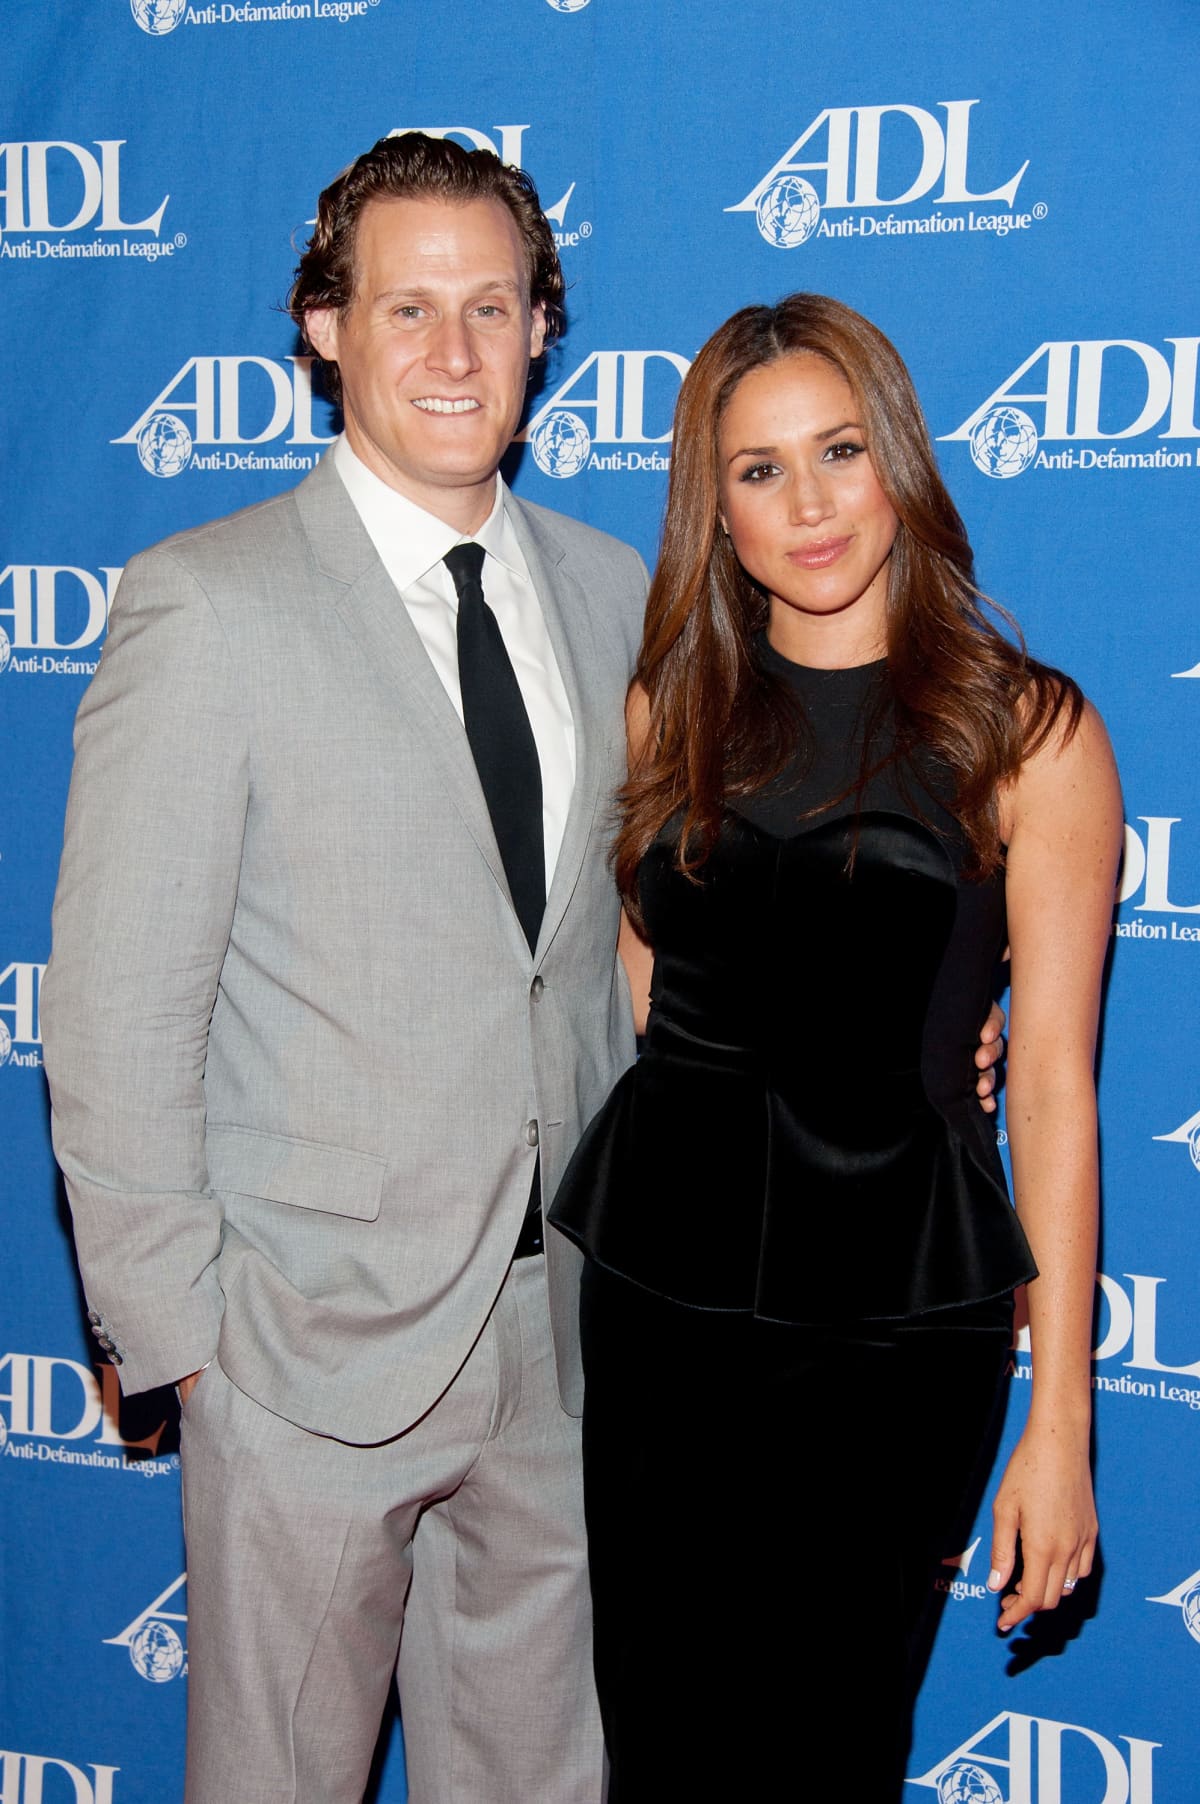 BEVERLY HILLS, CA - OCTOBER 11:  Trevor Engelson (L) and wife actress Meghan Markle arrives at the Anti-Defamation League Entertainment Industry Awards Dinner Honoring Ryan Kavanaugh at The Beverly Hilton hotel on October 11, 2011 in Beverly Hills, California.  (Photo by Michael Kovac/WireImage)